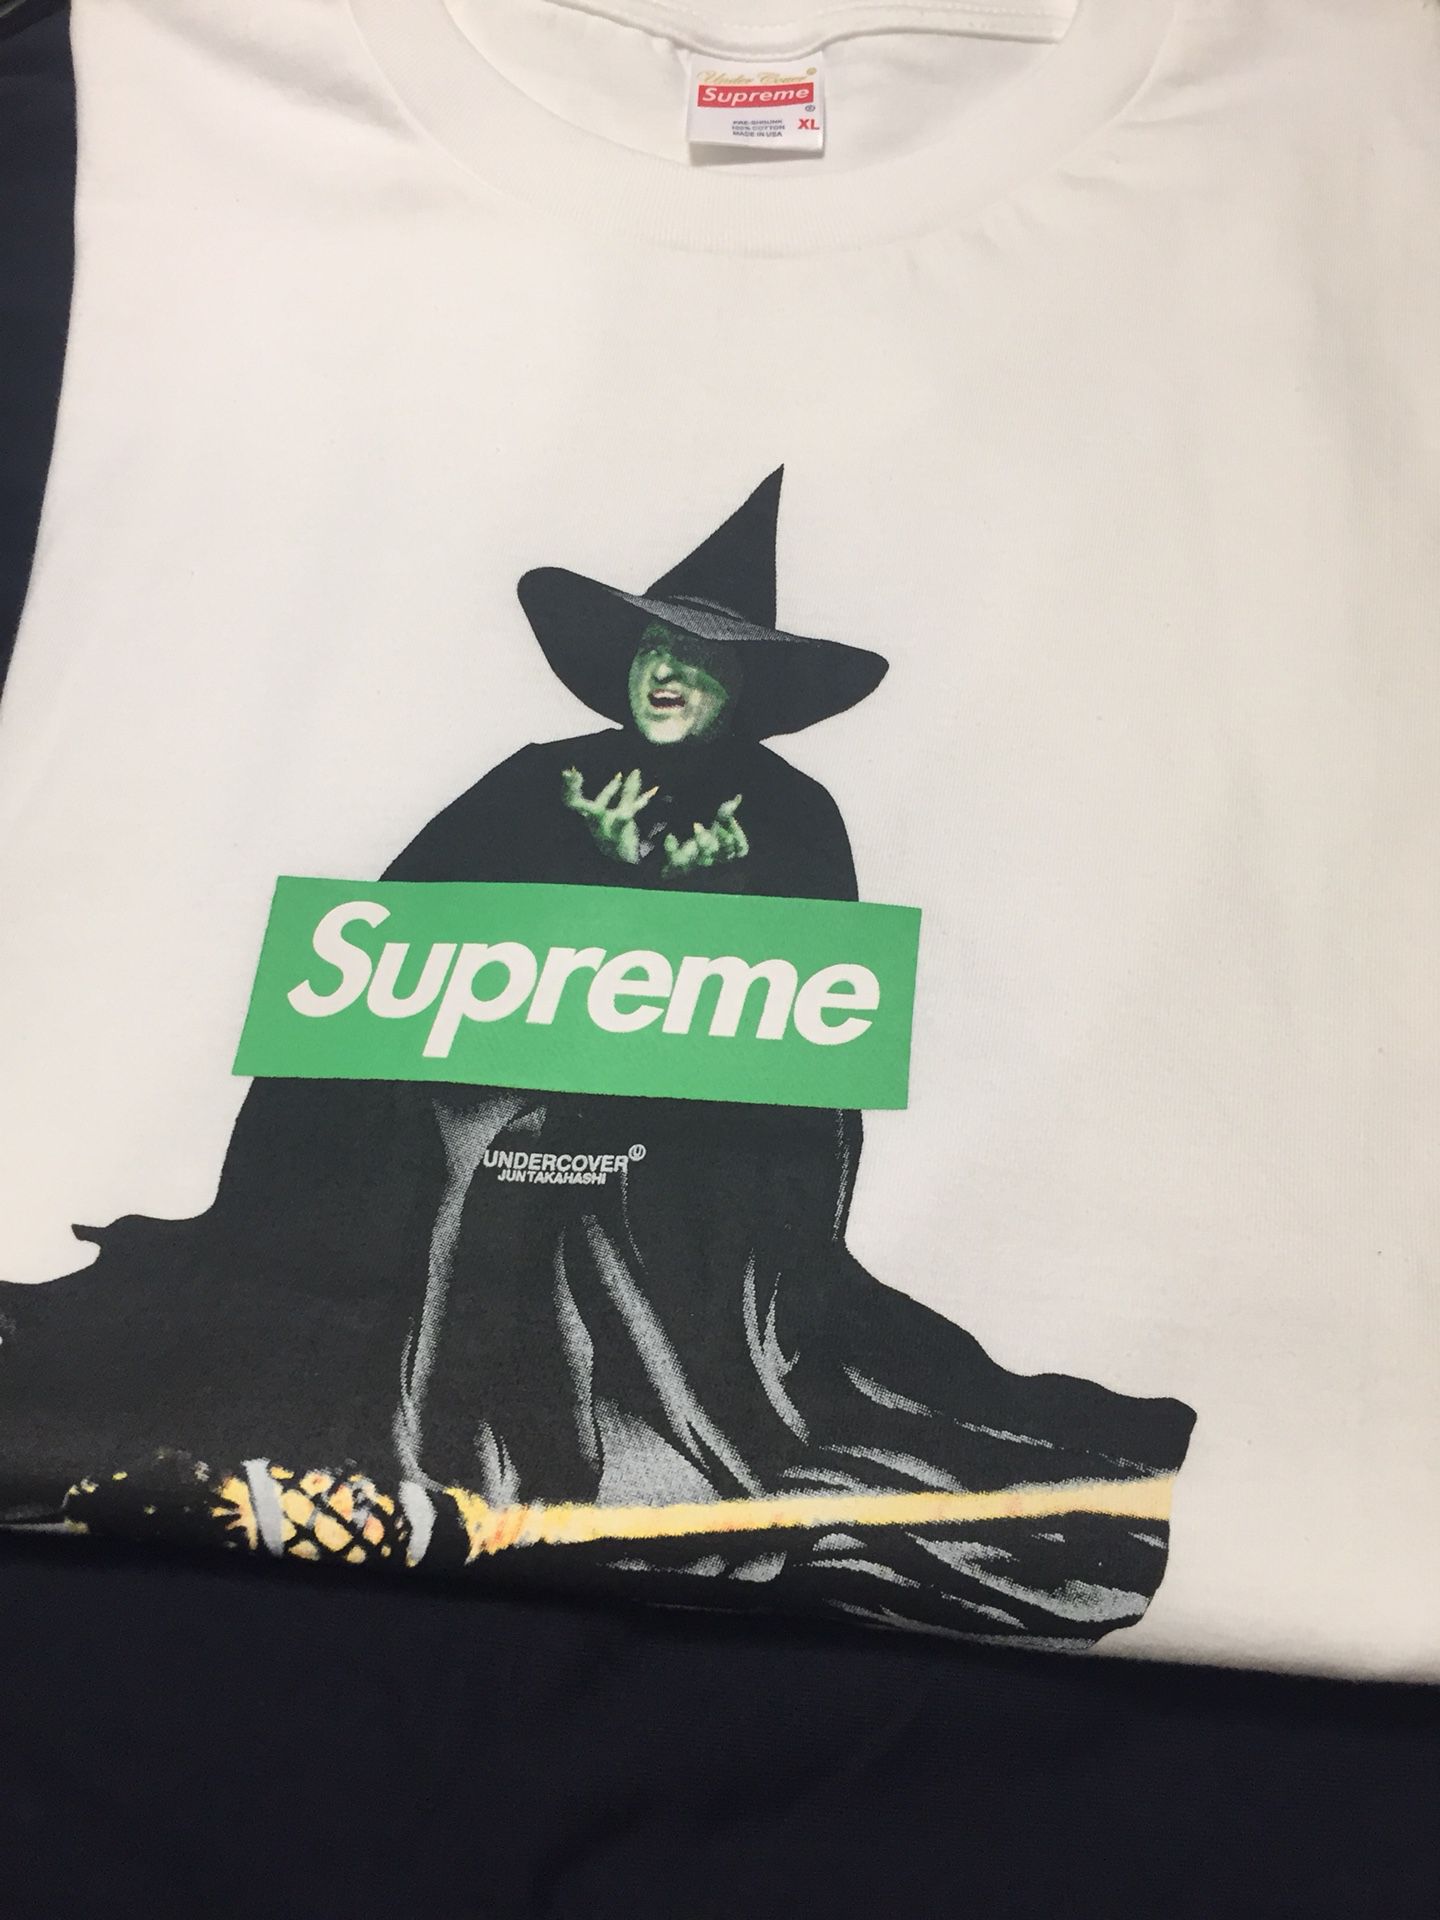 Supreme under cover shirt witch